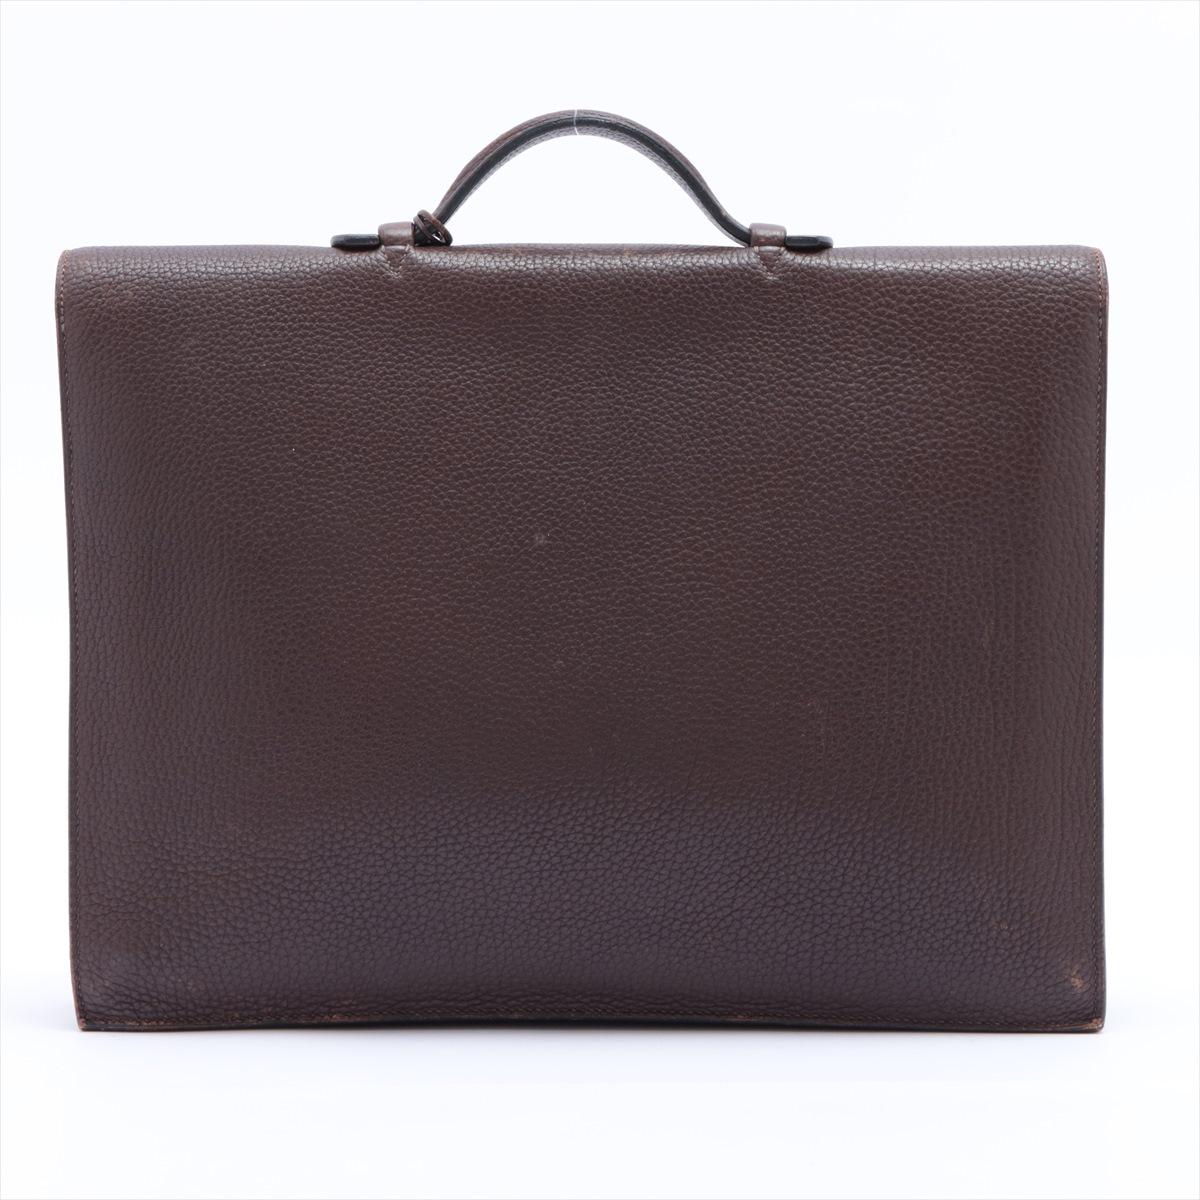 Cacao Togo calfskin leather natural veining with a soft pebbled finish Hermes Sac a Depeches briefcase bag, paired with palladium plated hardware and a single flat top handle, flap top with flip lock and keys, one rear flat pocket outside and one